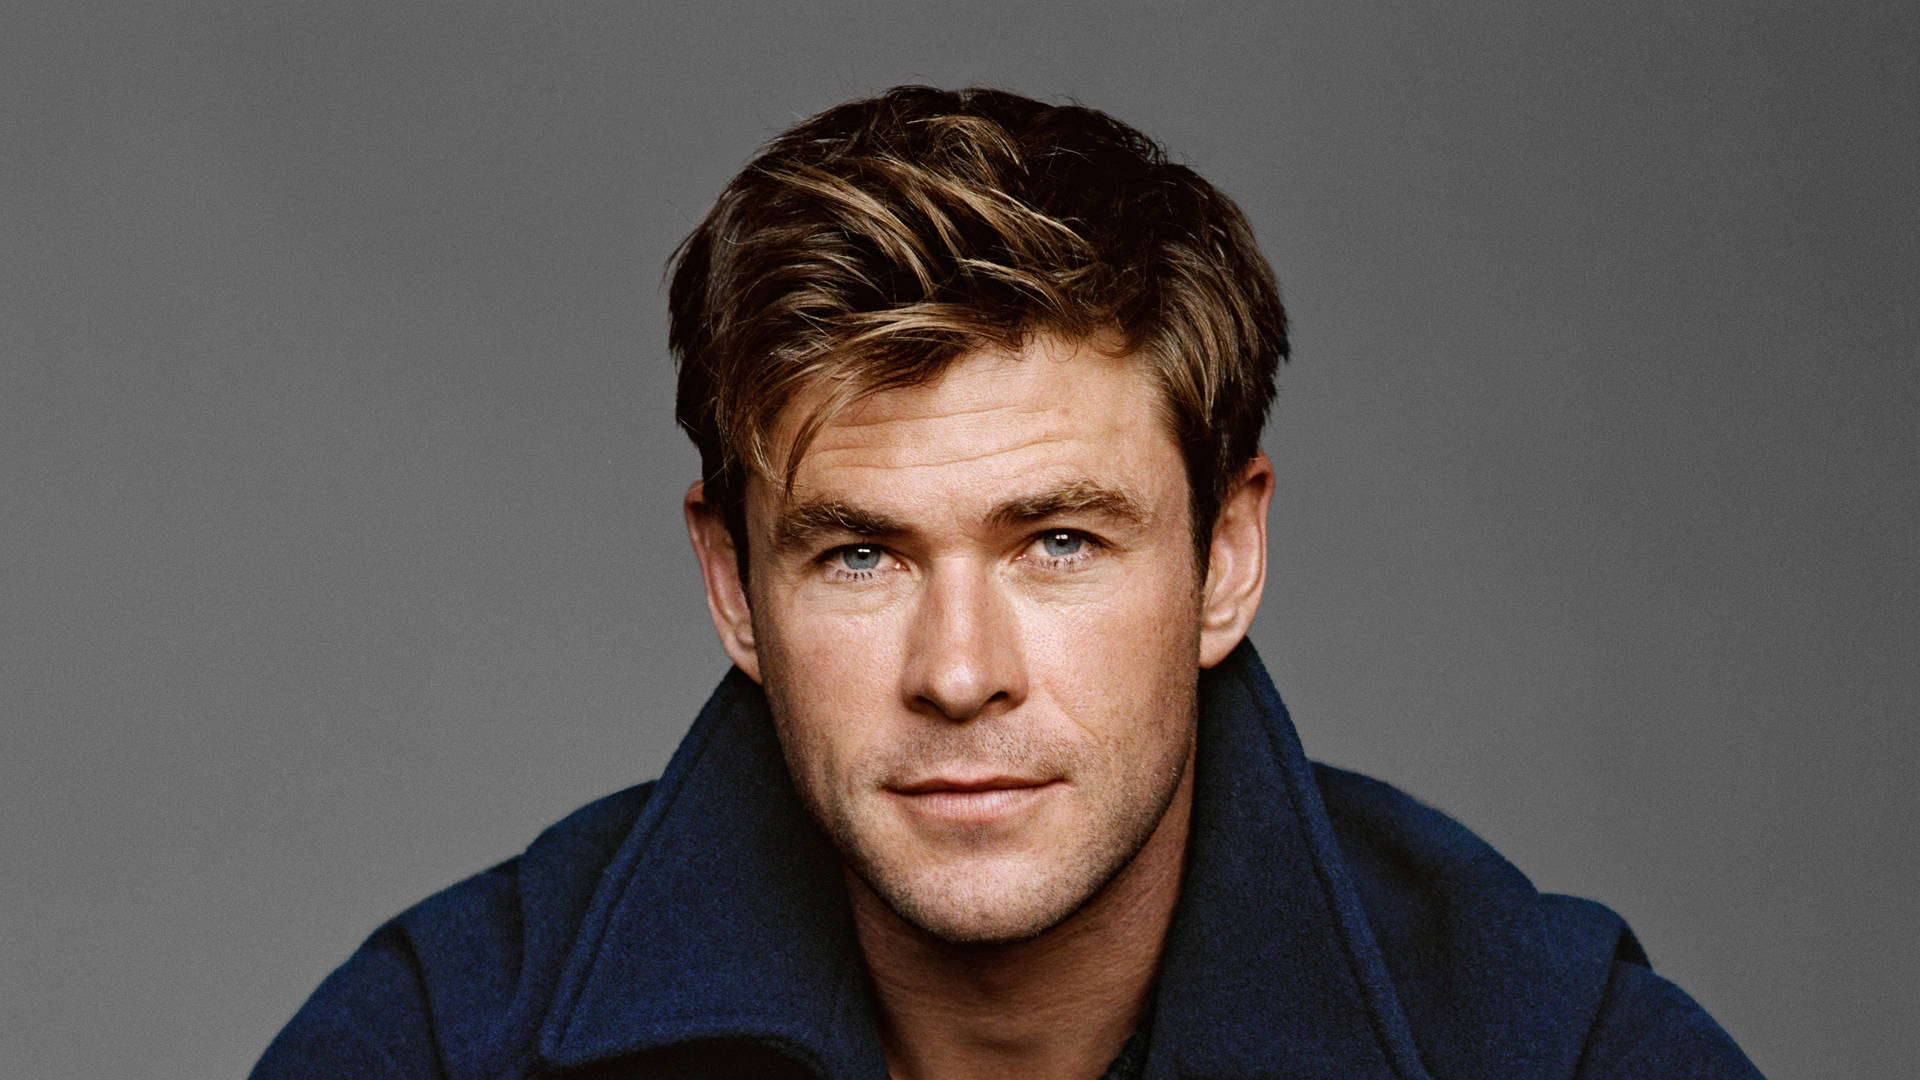 Chris Hemsworth Strikes A Pose In A Blue Jacket. Background